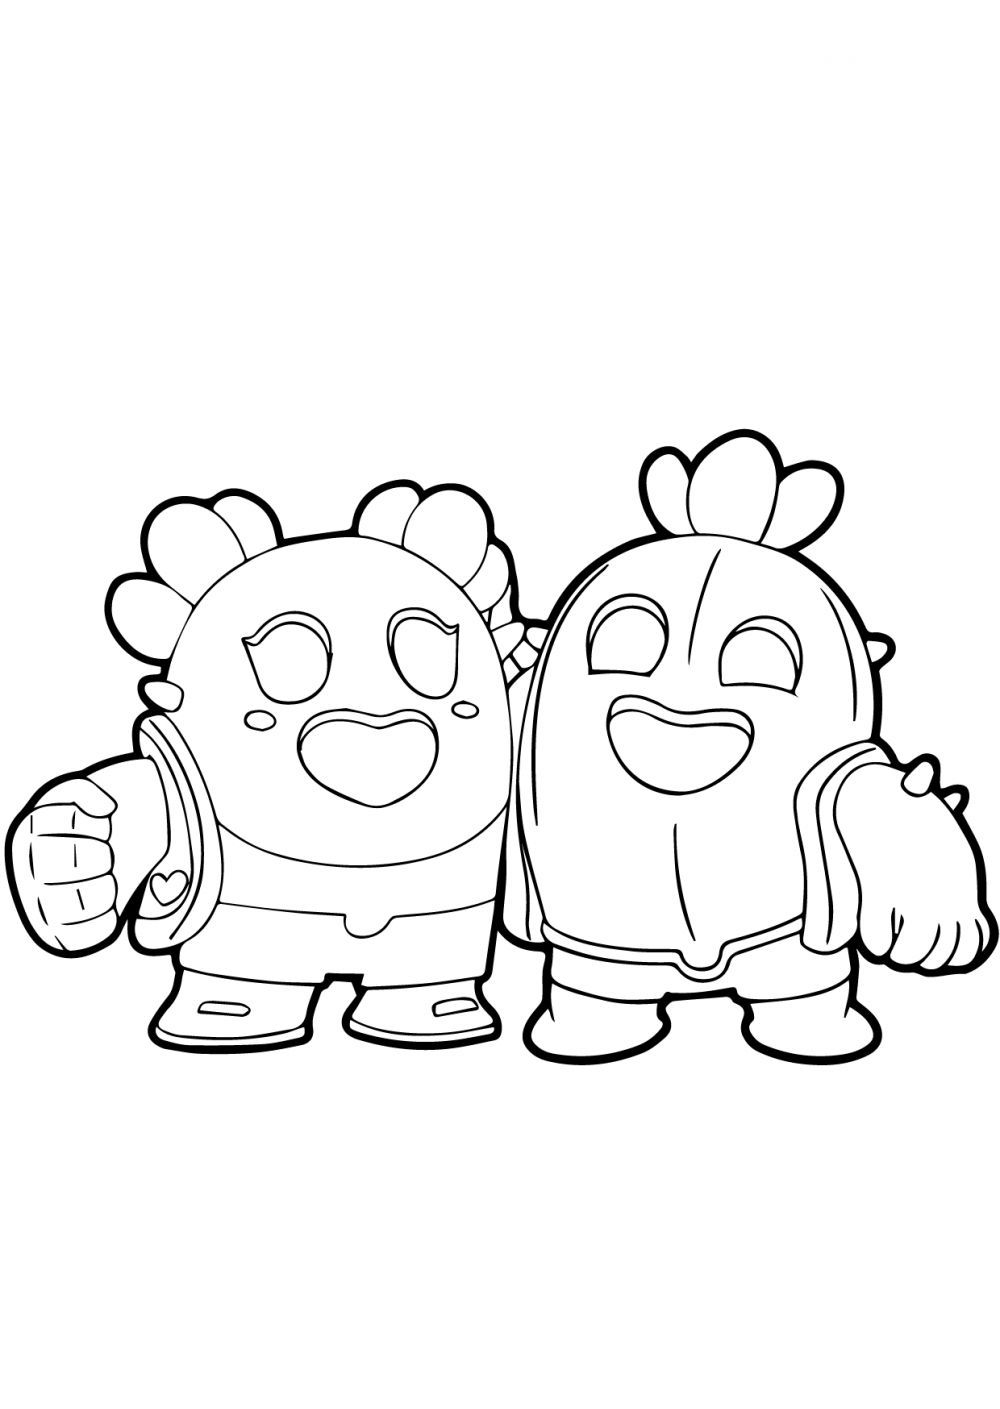 Coloring page Brawl Stars Spike Cactus  Coloriage, Coloriage magique,  Coloriage magique cp